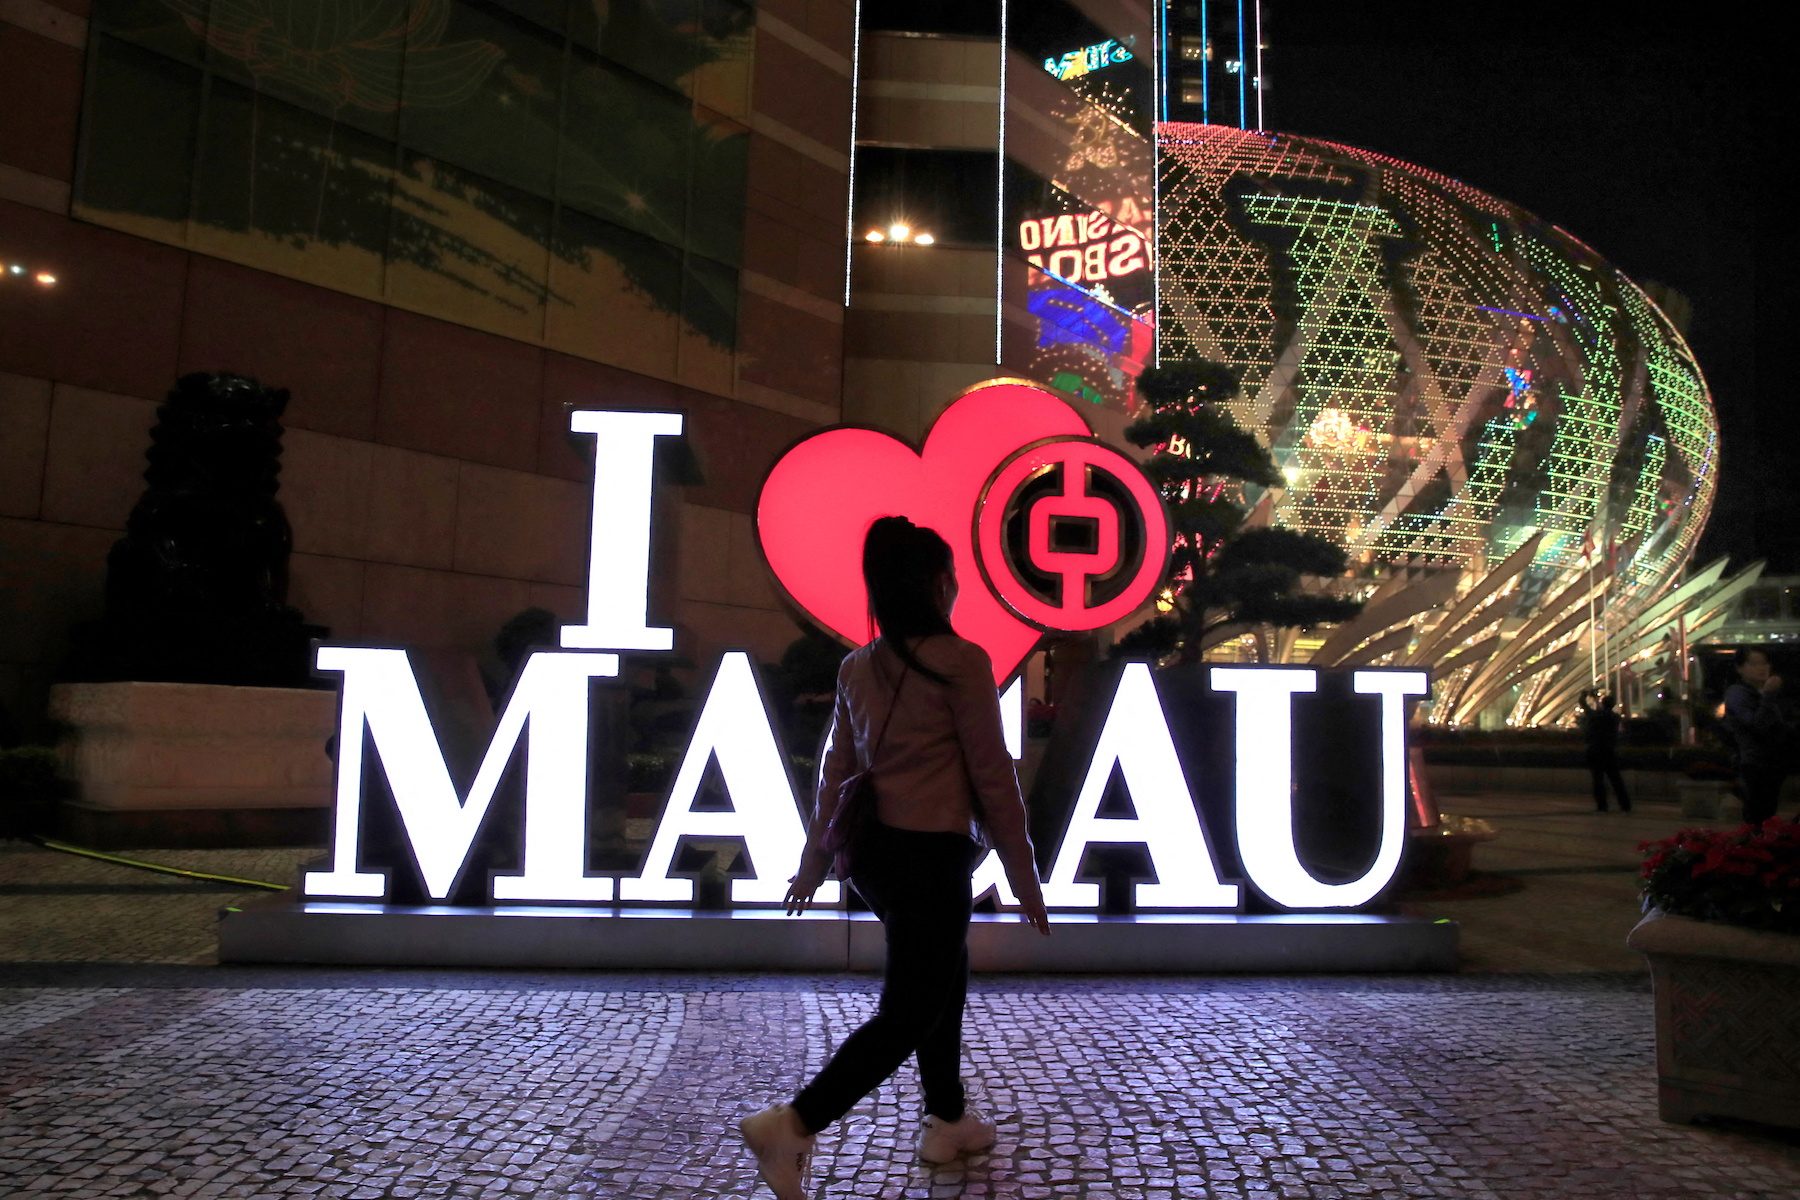 Macau’s draft gaming bill outlines tighter control of casinos, junkets